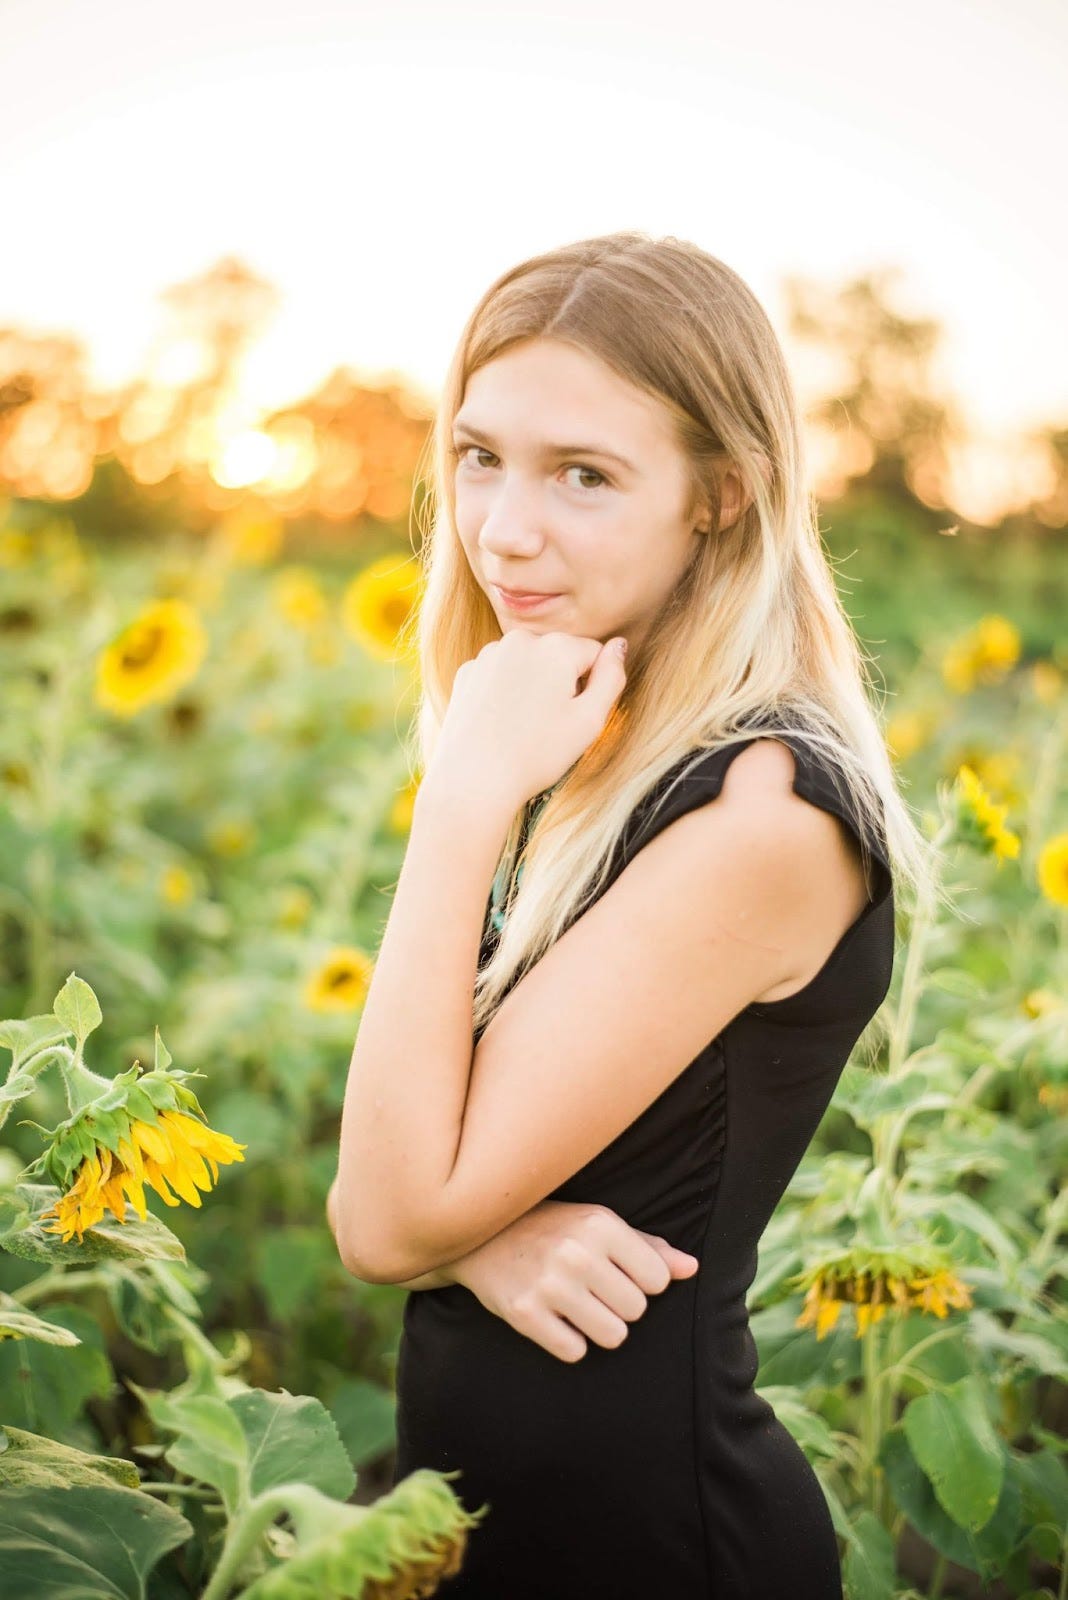 A blond girl in a black dress facing the camera in a field of sunflowers.